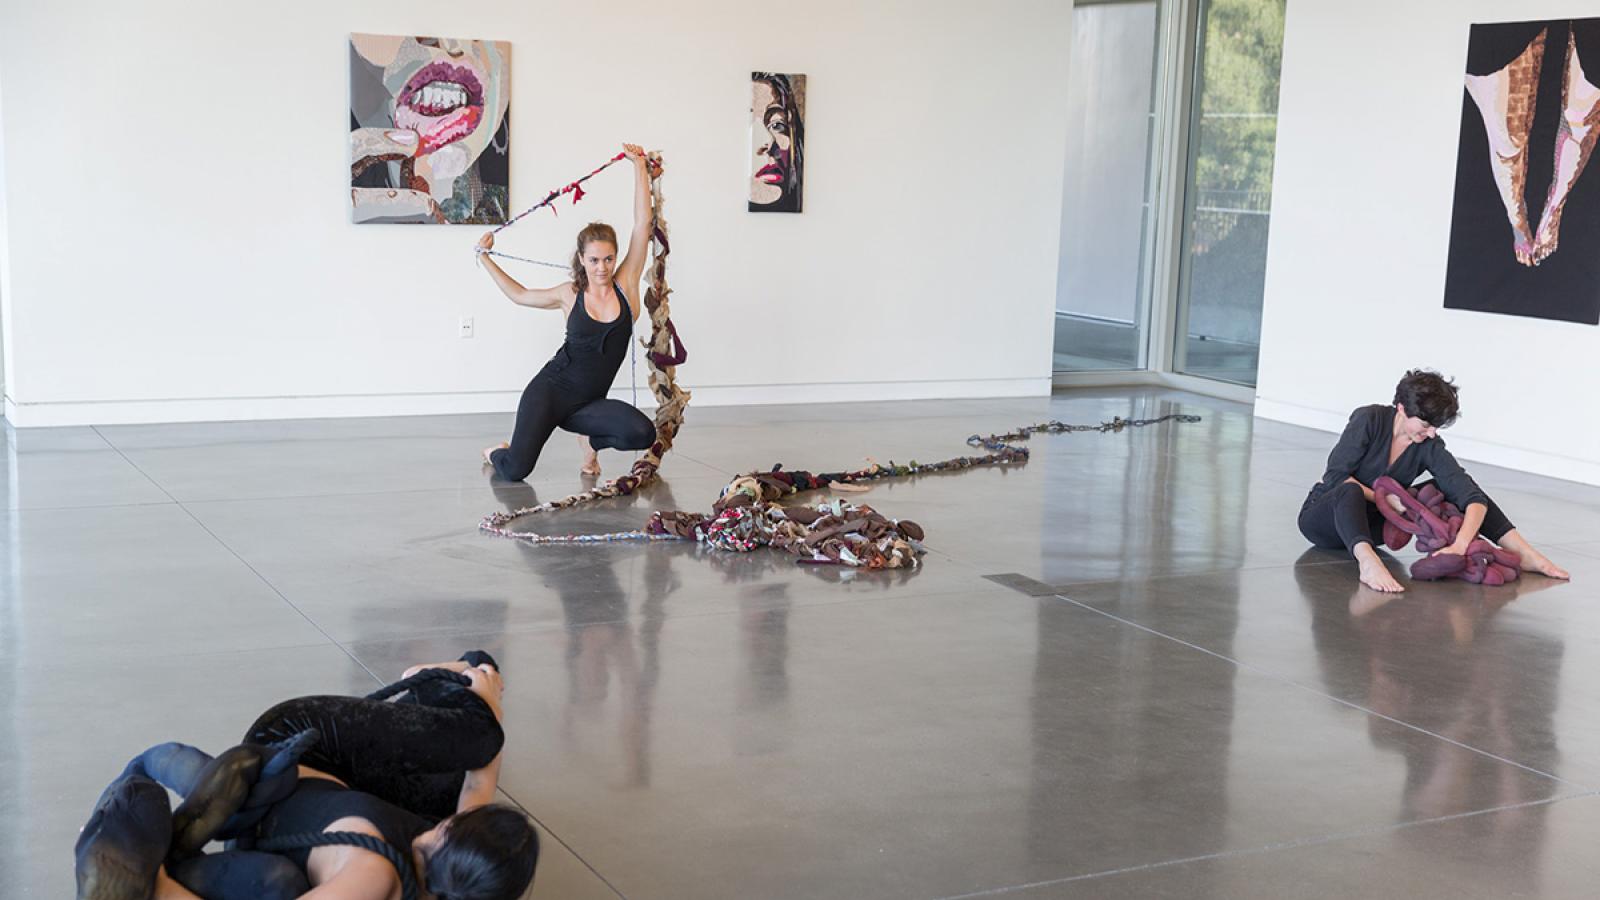 Sara Arthur-Paratley, Six, dance performance with Cassie Wang and Sophie Zagerman